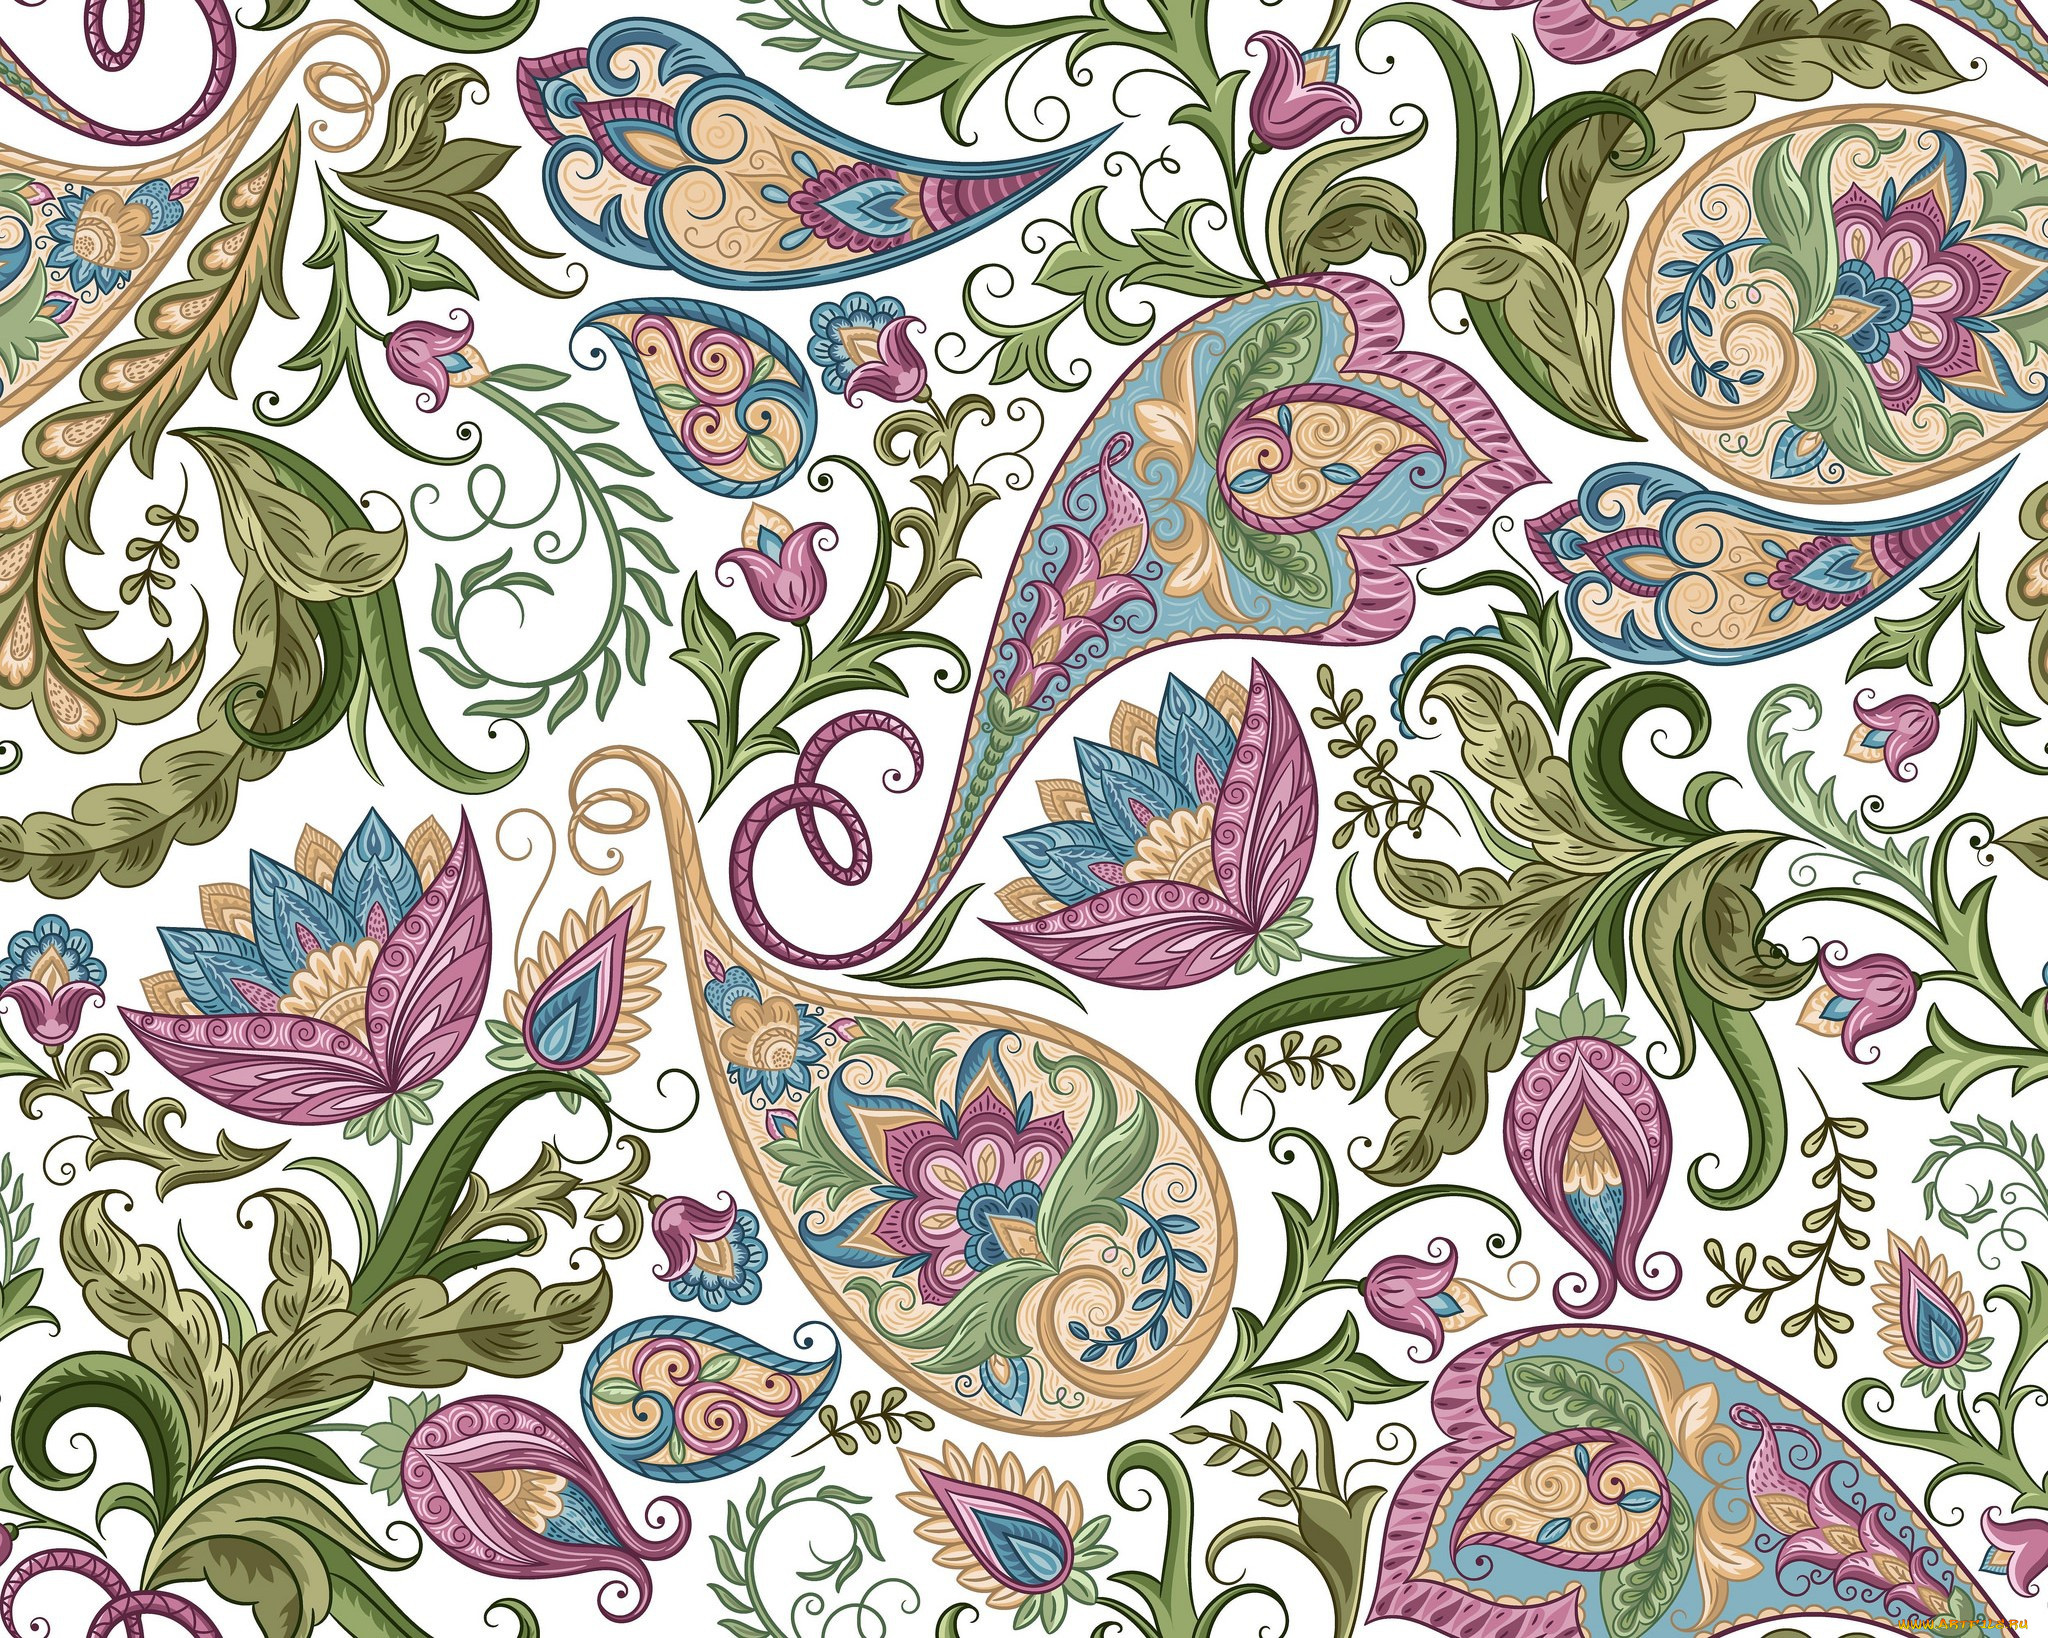  ,  , flowers, paisley, background, design, , , , , , floral, seamless, 